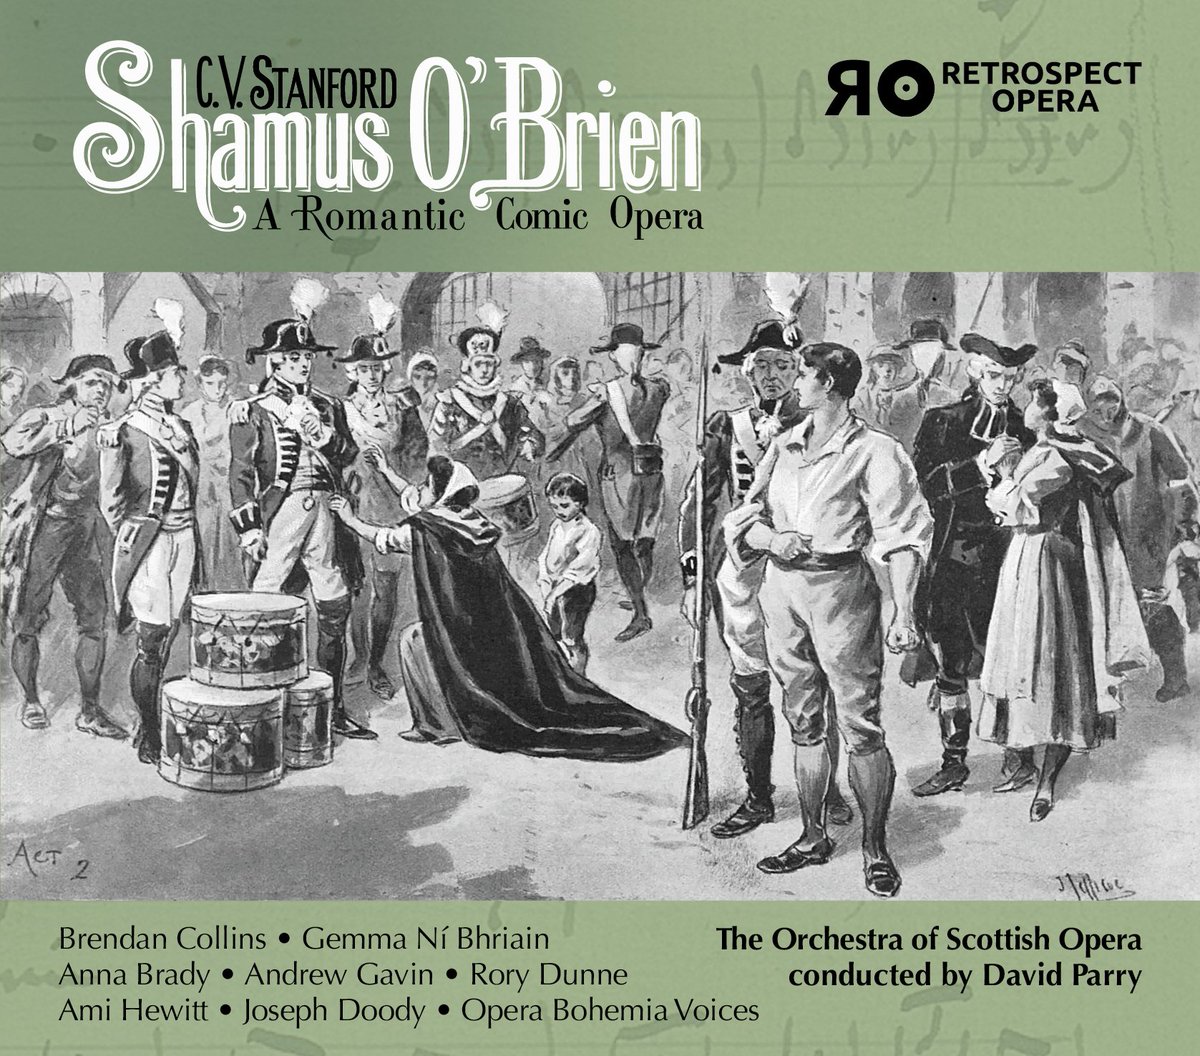 STANFORD’S SHAMUS O’BRIEN – RELEASED TODAY! @RetrospectOpera (RO011, 2 CDs), £23.95. For further information and to order: retrospectopera.org.uk/product/shamus… Congratulations to @GemmaNB @amihewitt4 @joseph_doody @JarlathHendersn @ScottishOpera @OperaBohemia and all the cast!